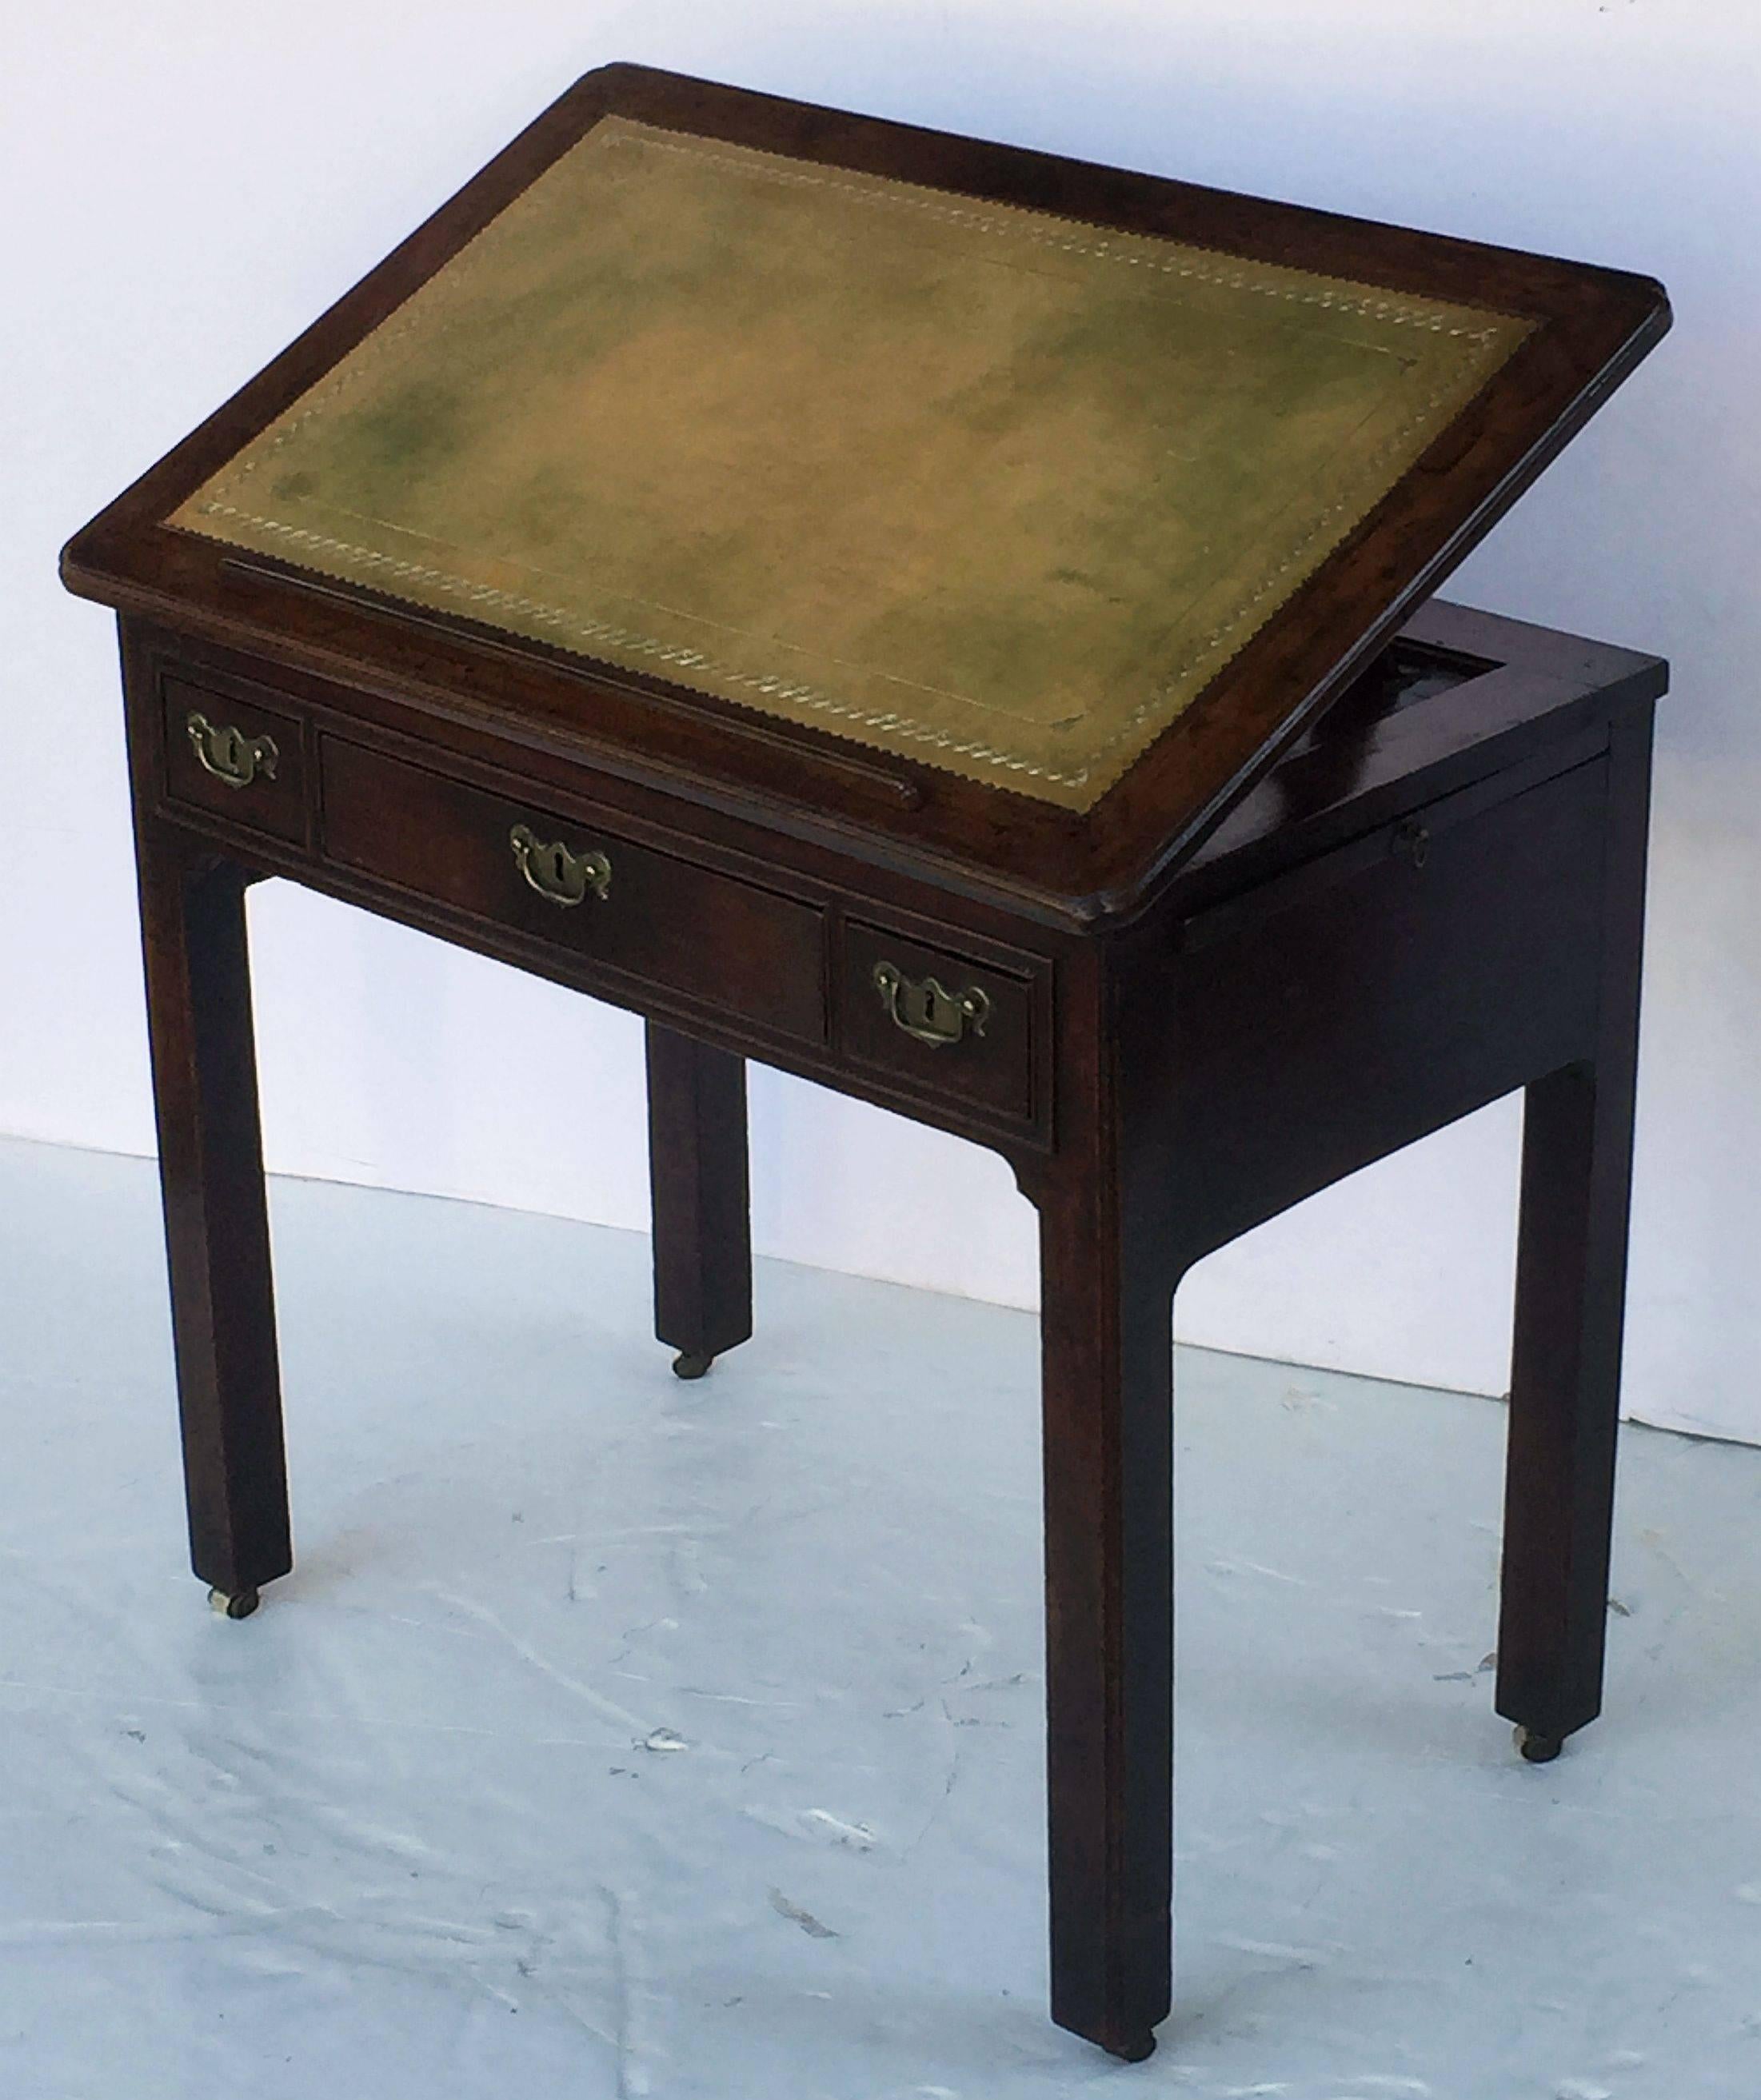 A handsome English architect's or library table (or draughting desk) from the Georgian Era, circa 1760, featuring a moulded mahogany slope top with embossed leather writing or drawing surface, with adjustable height stand and brass locking hardware